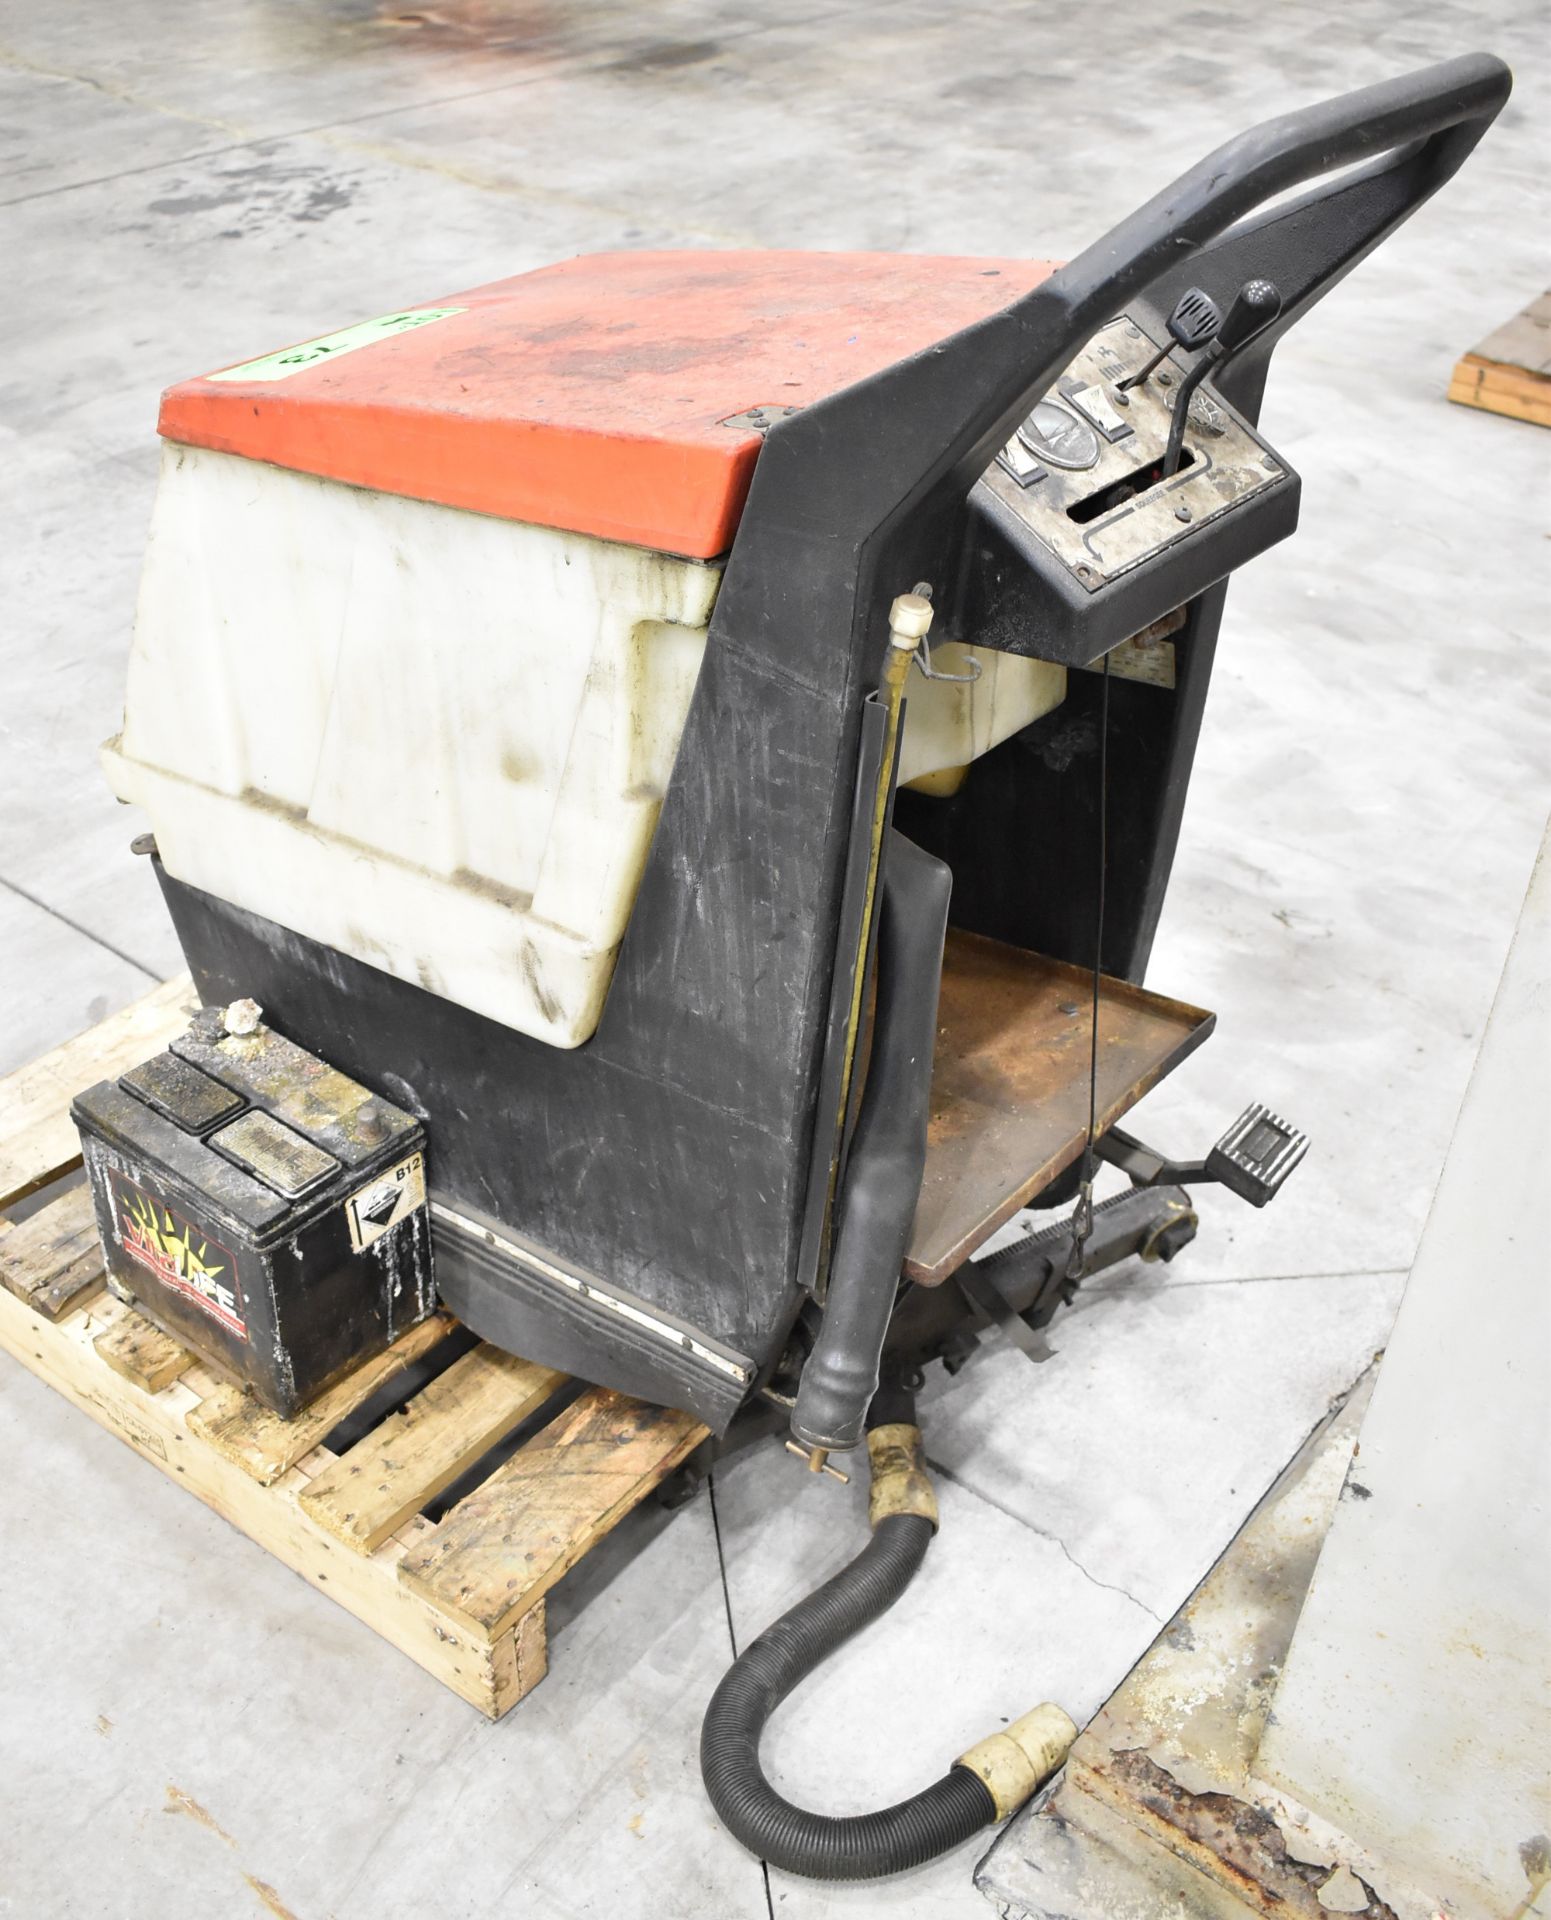 MFG. UNKNOWN ELECTRIC WALK-BEHIND FLOOR SCRUBBER, S/N: N/A (NOT IN SERVICE - NO BATTERY) - Image 2 of 5